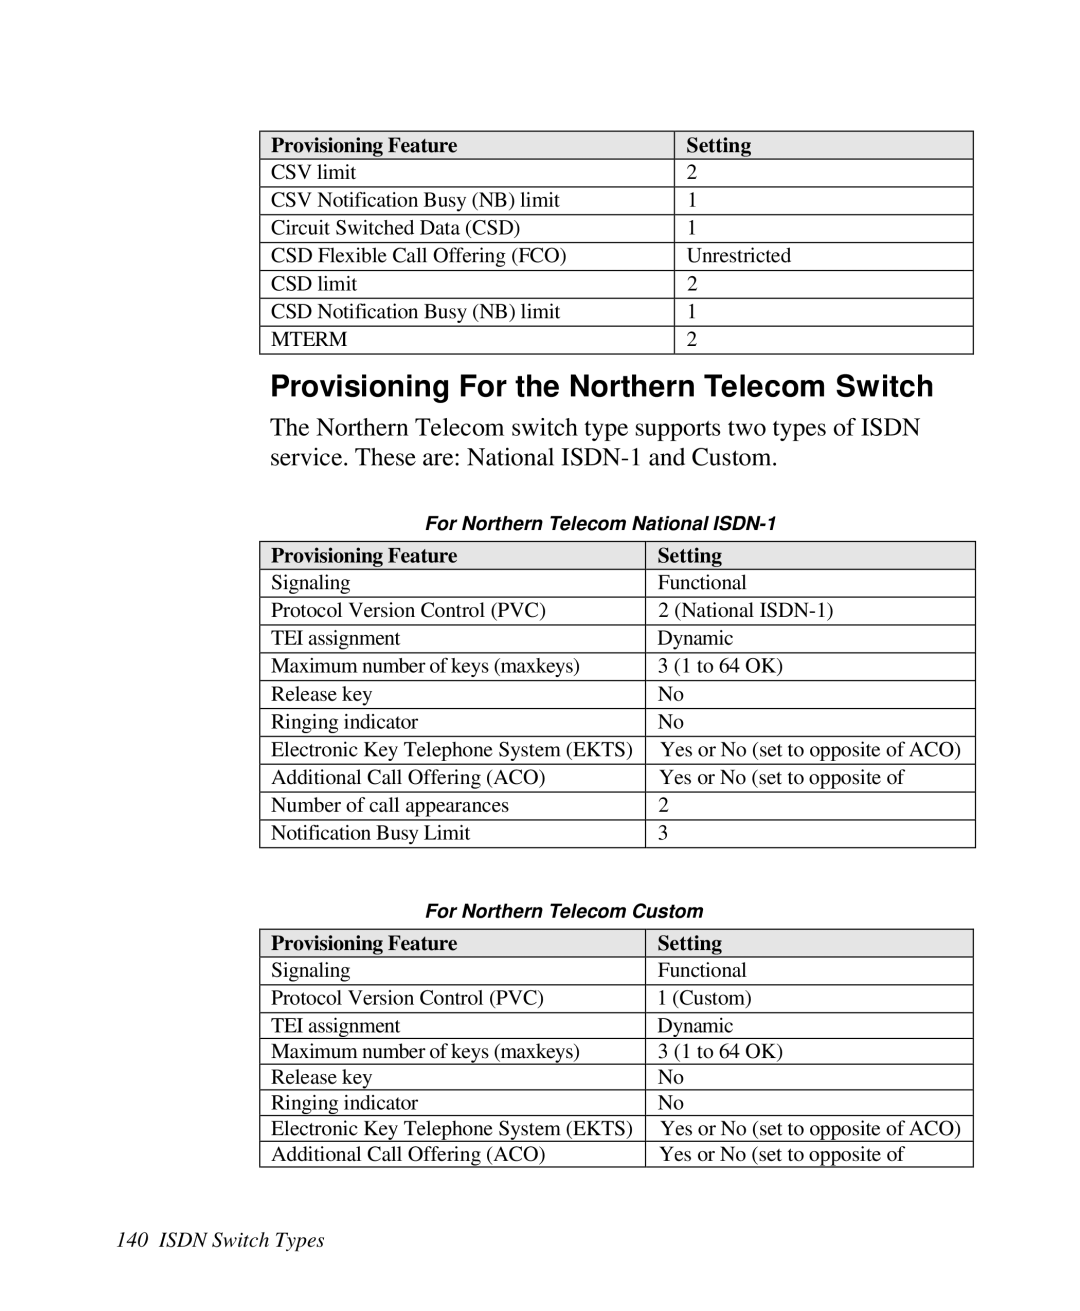 ZyXEL Communications Prestige 128 user manual Provisioning For the Northern Telecom Switch, Provisioning Feature, Setting 